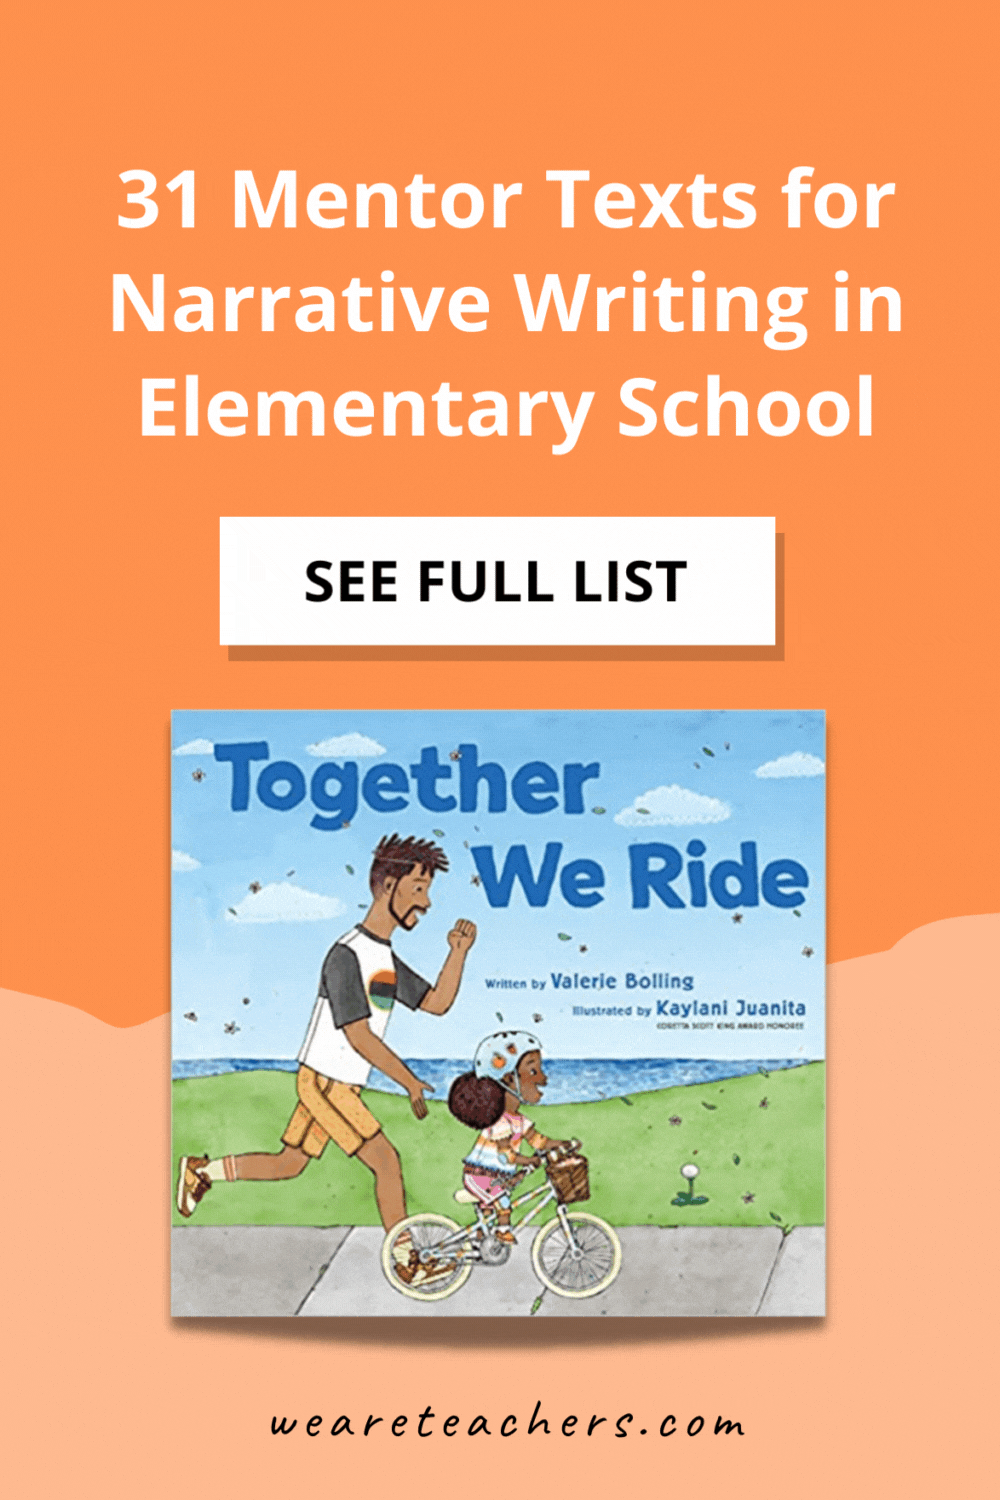 Update your stack of mentor texts for narrative writing to bring students' stories to life in new and exciting ways.